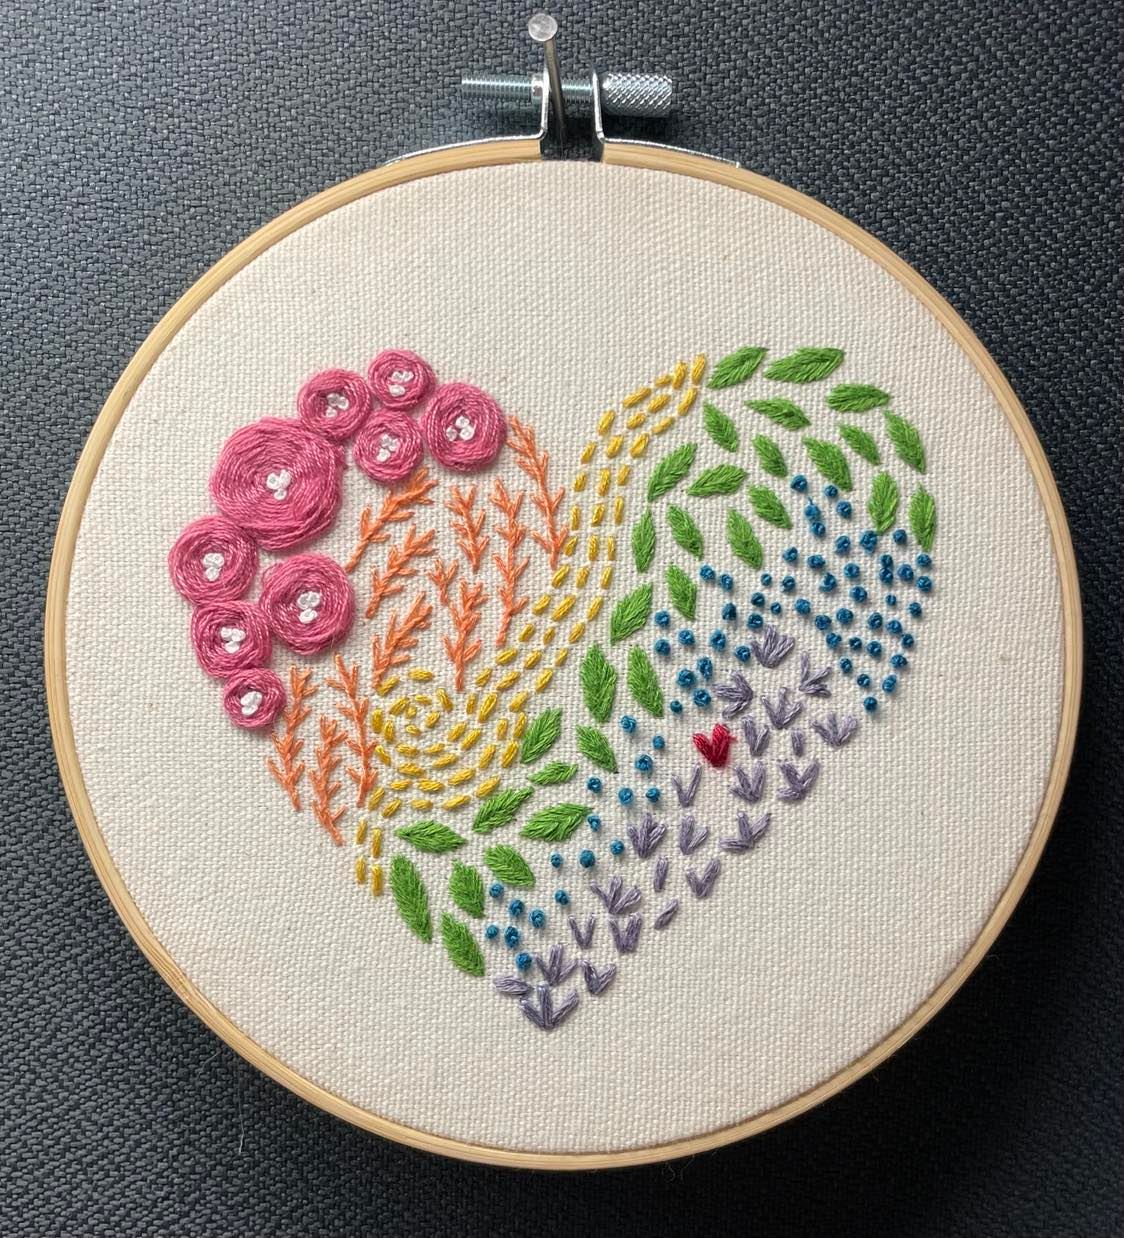 Rainbow Heart Finished Embroidery Piece